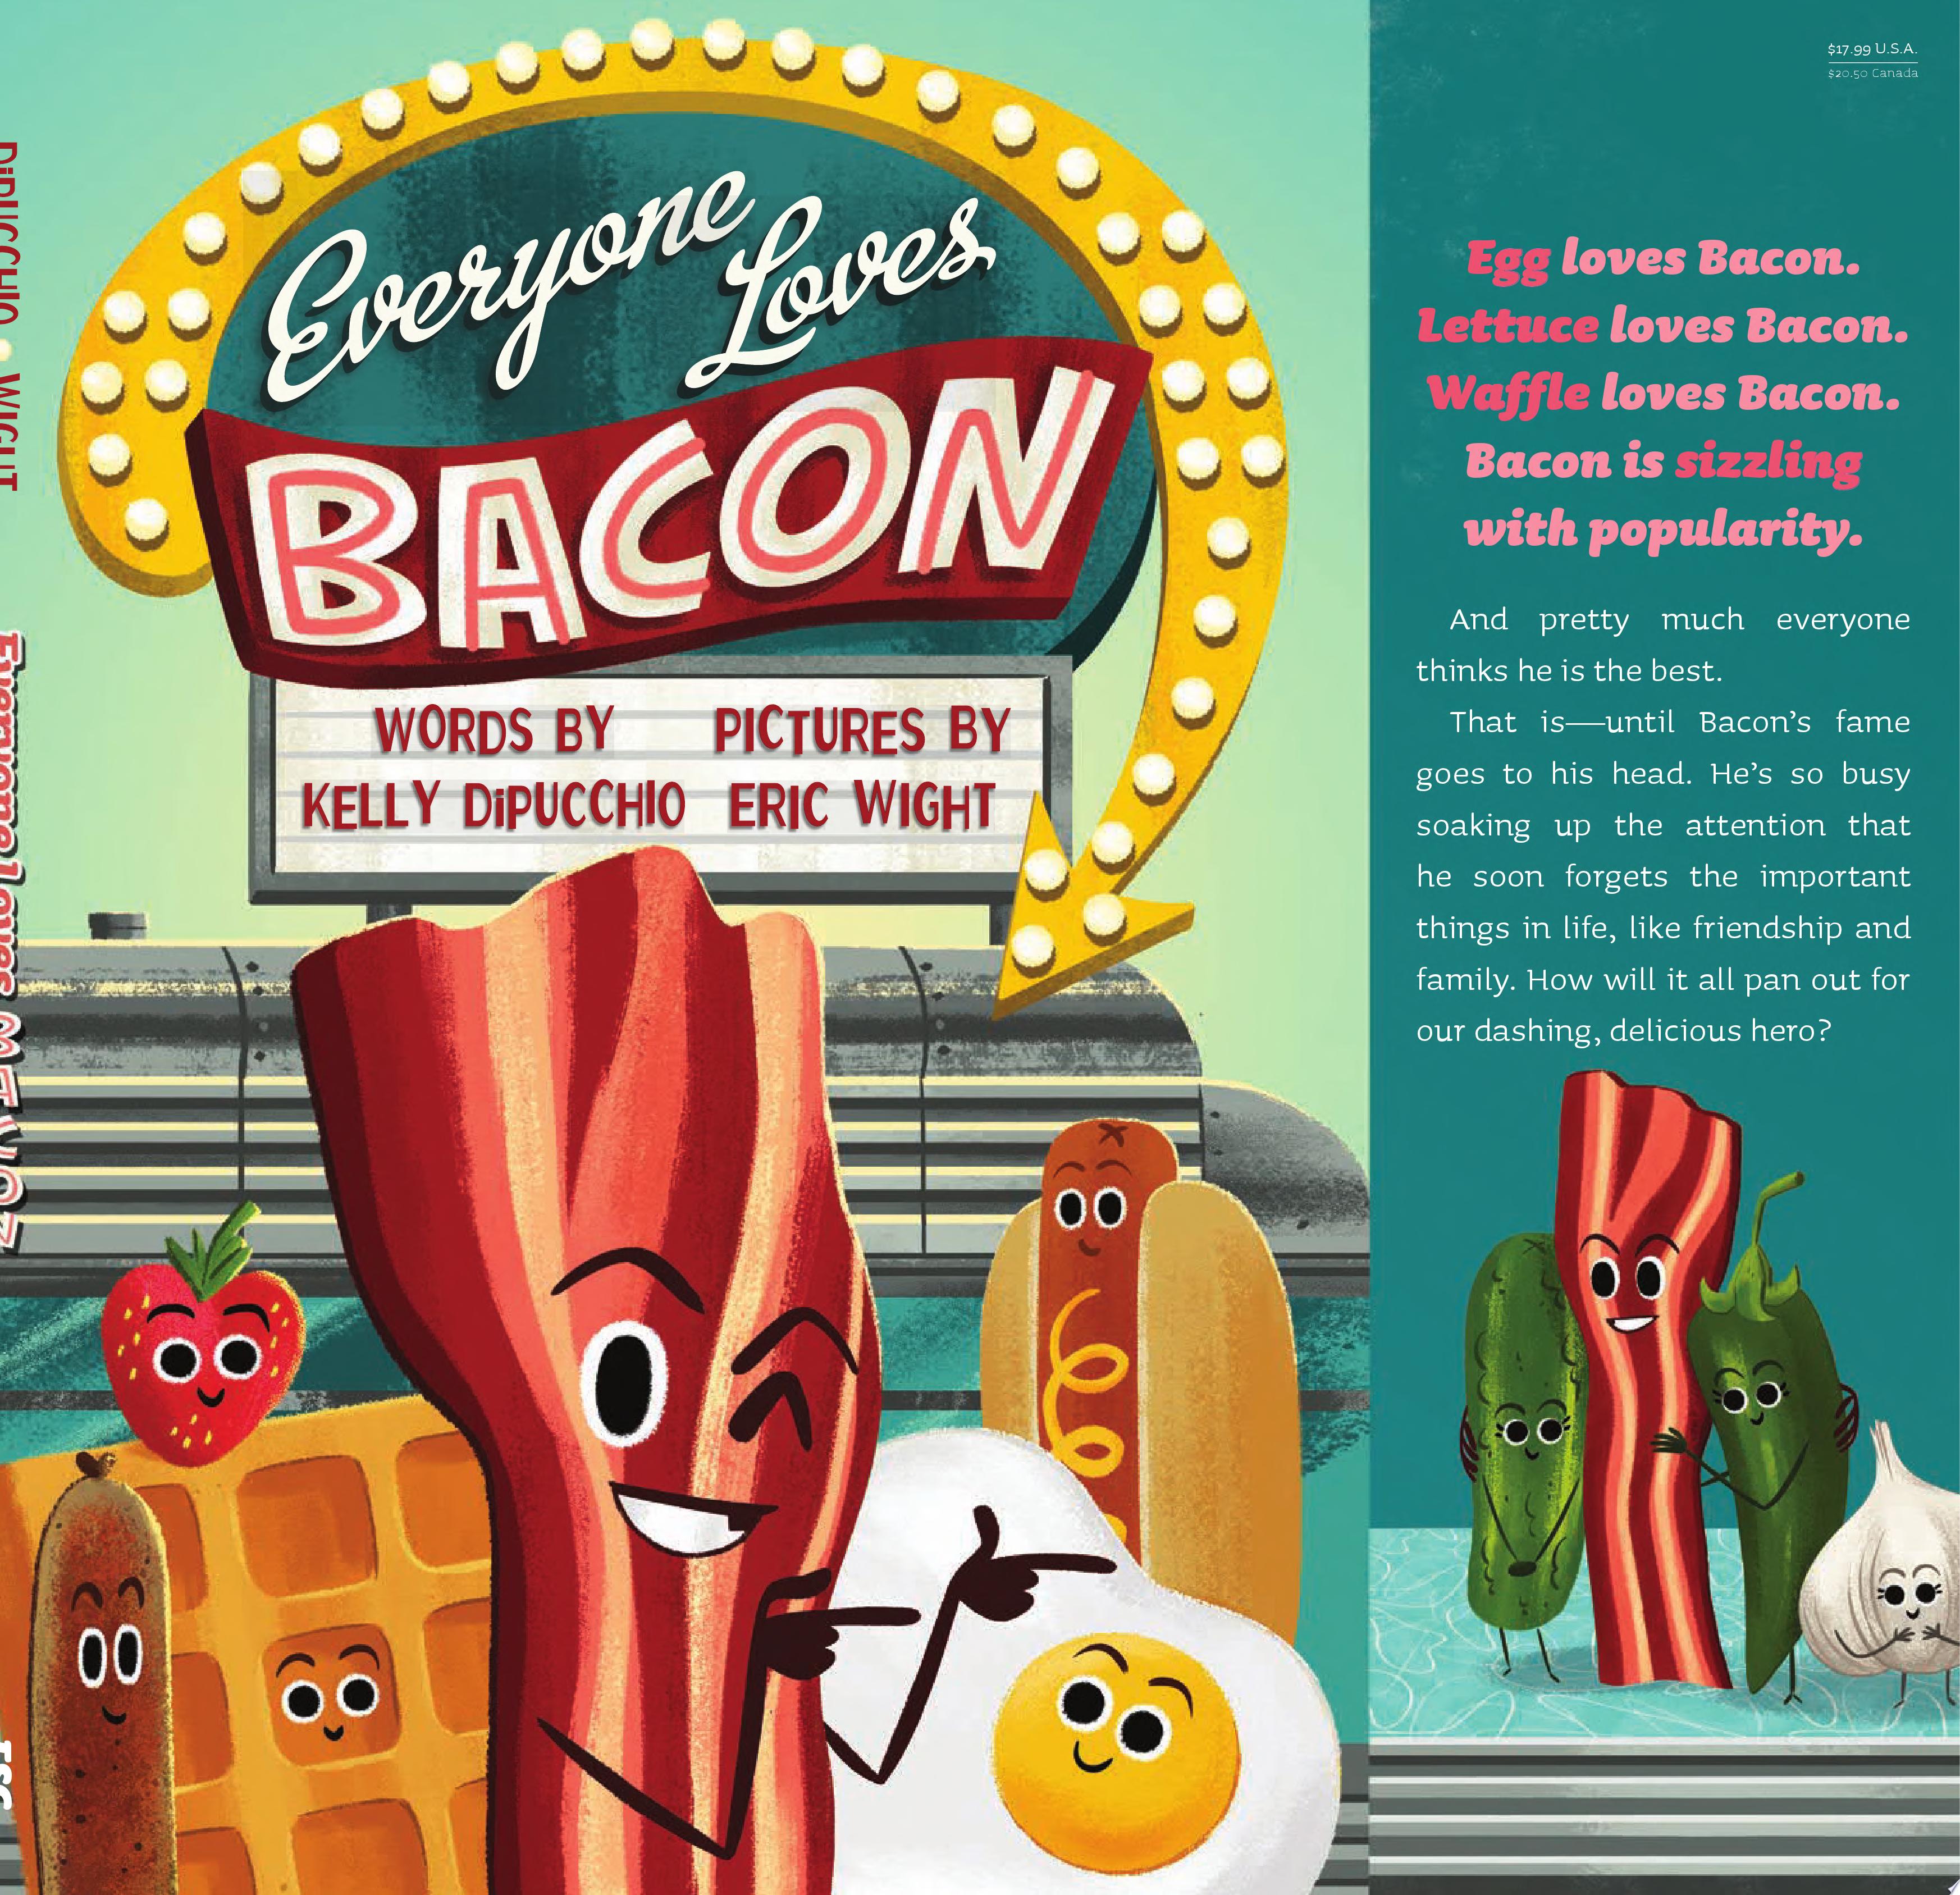 Image for "Everyone Loves Bacon"